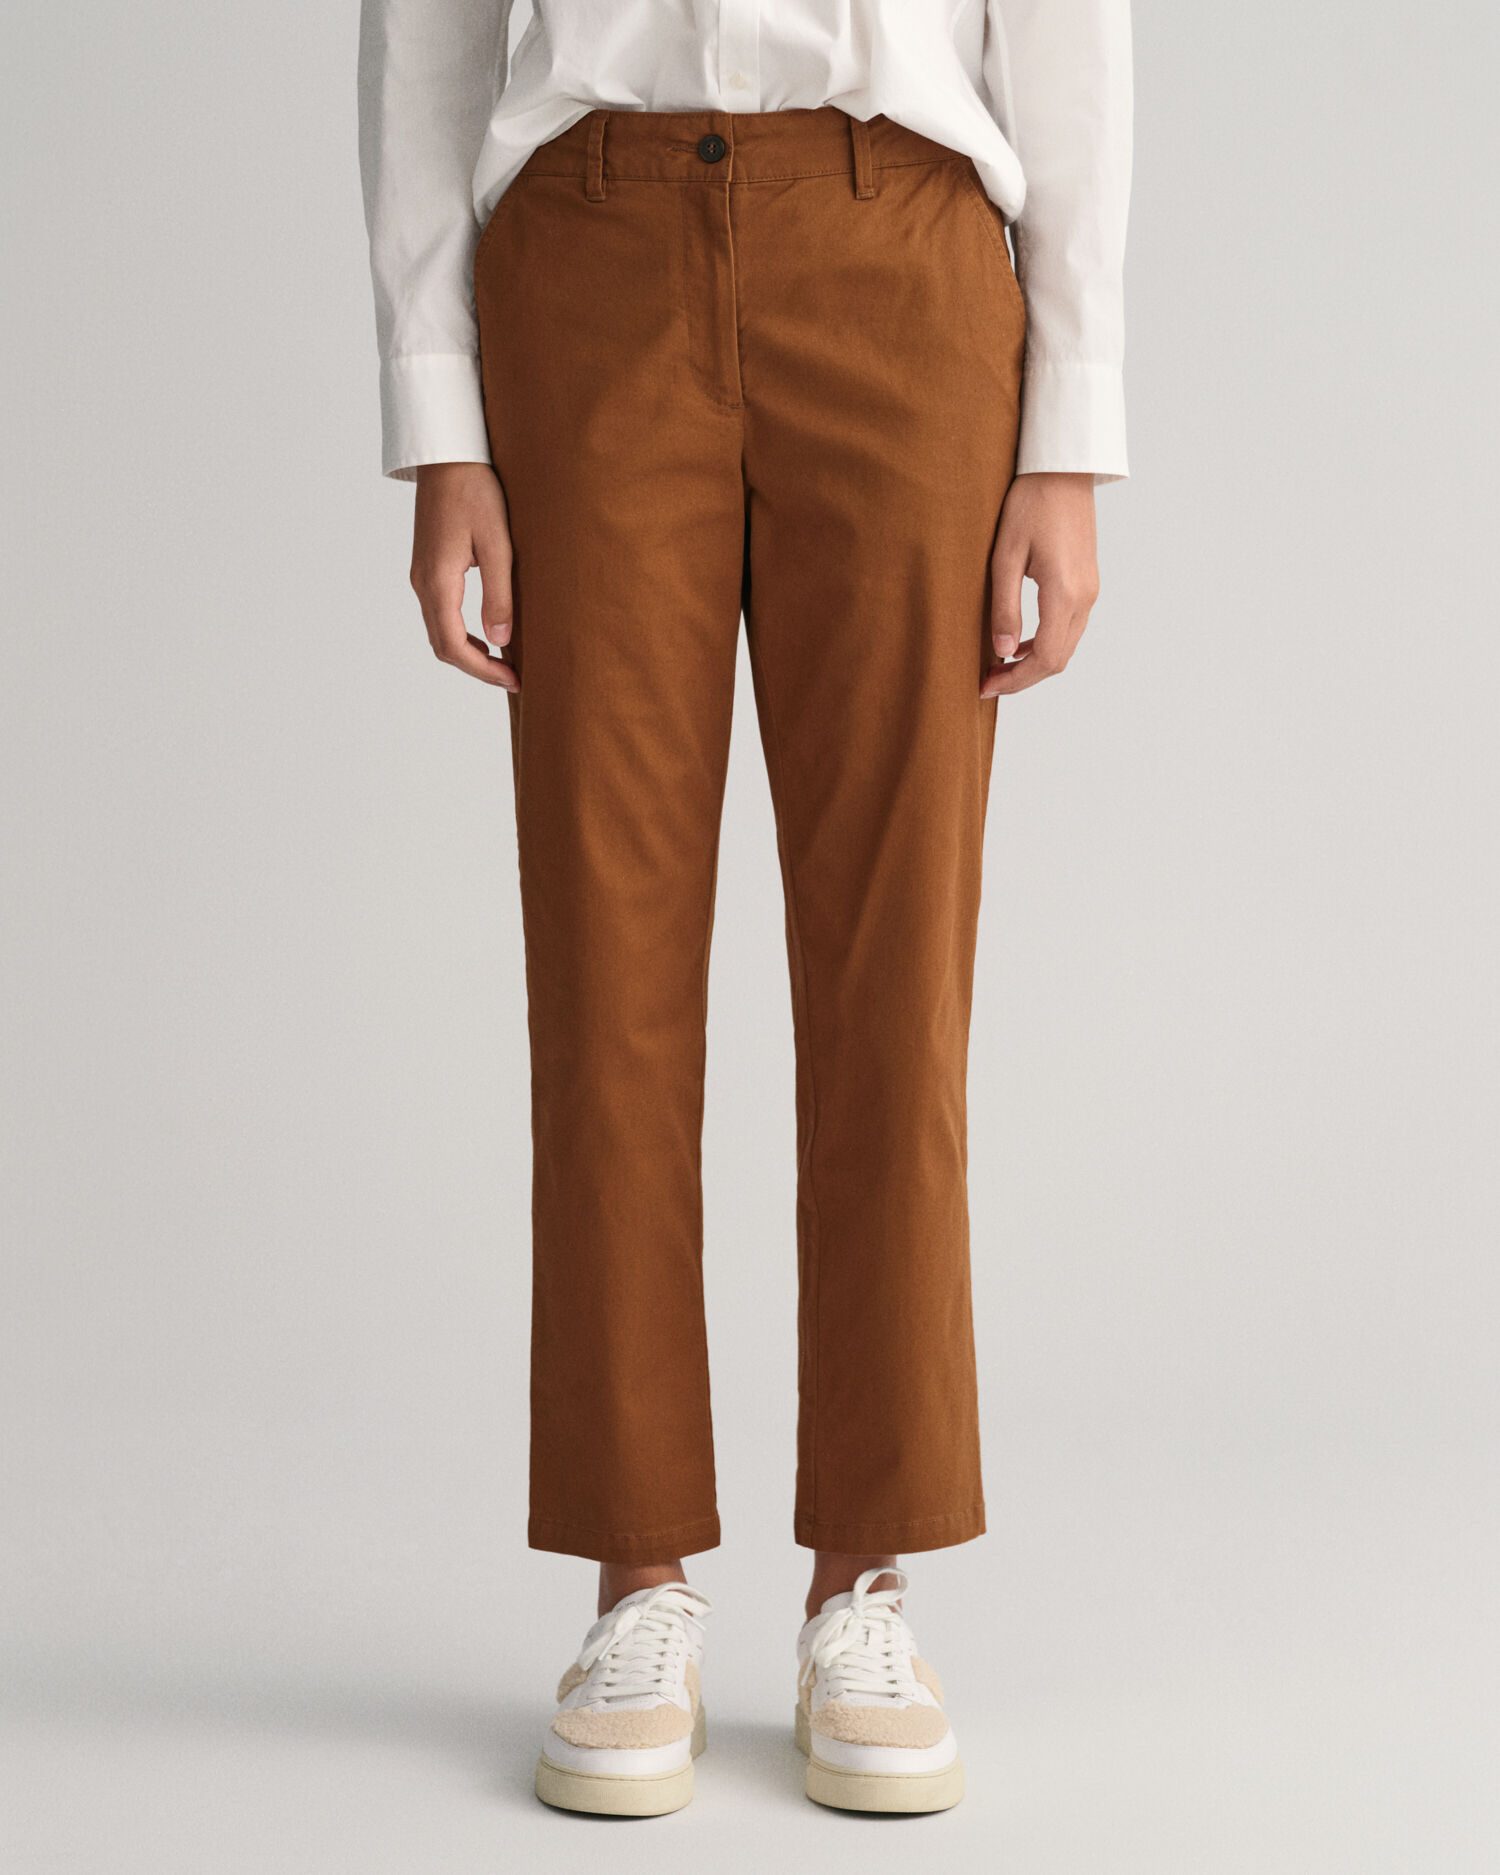 High-Waisted OGC Chino Cropped Workwear Pants for Women | Old Navy